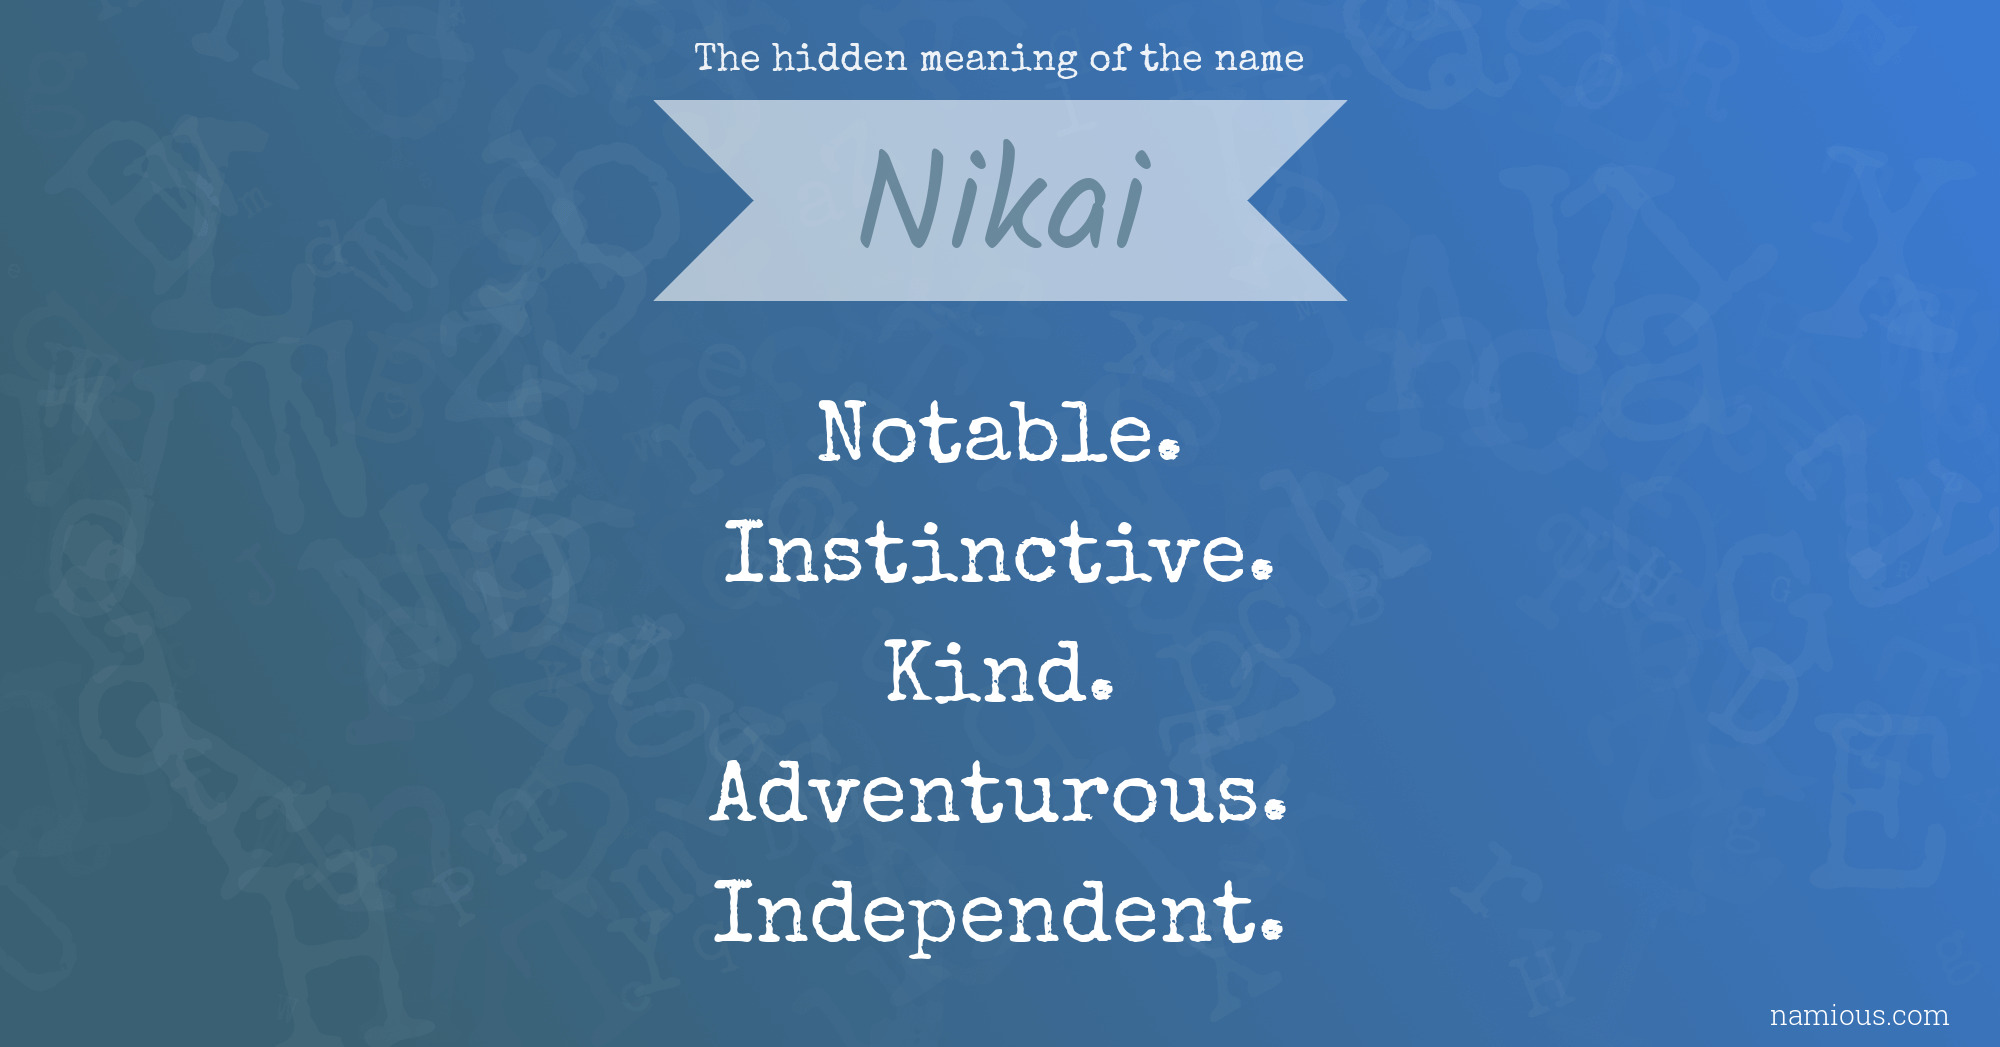 The hidden meaning of the name Nikai